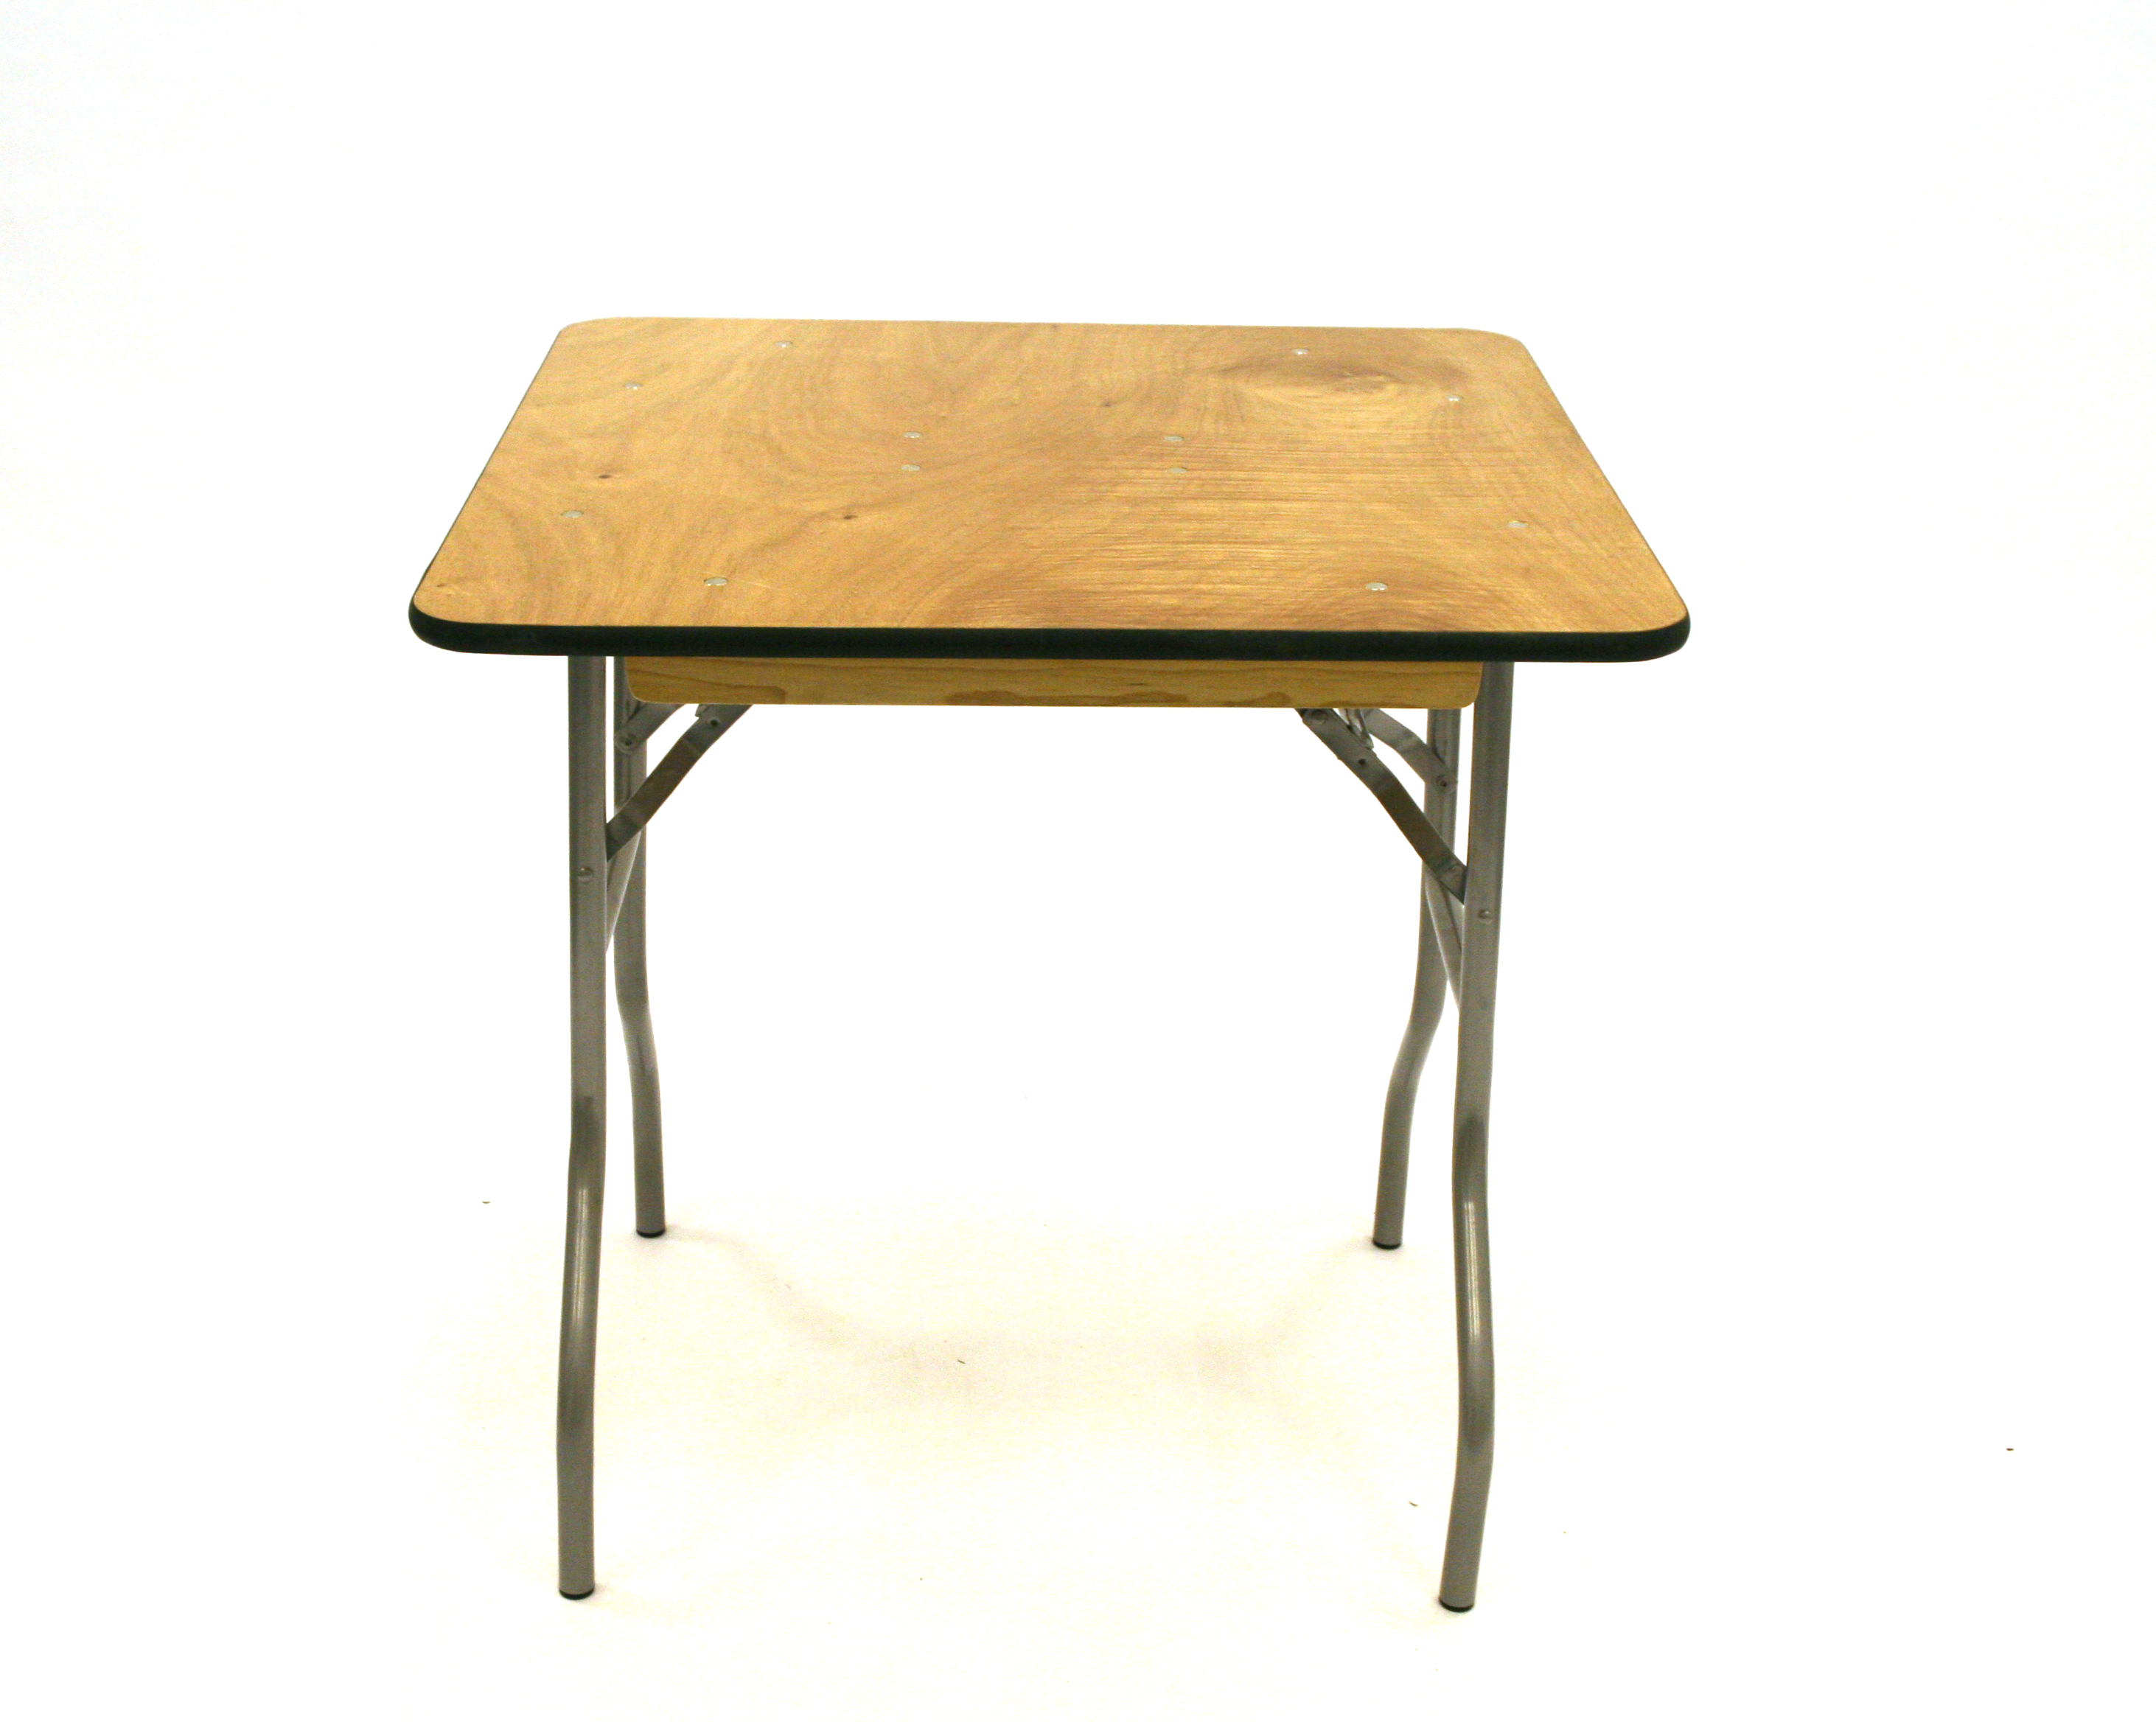 Varnished Trestle Table - 2'6" x 2'6" - Table for Two - BE ...
